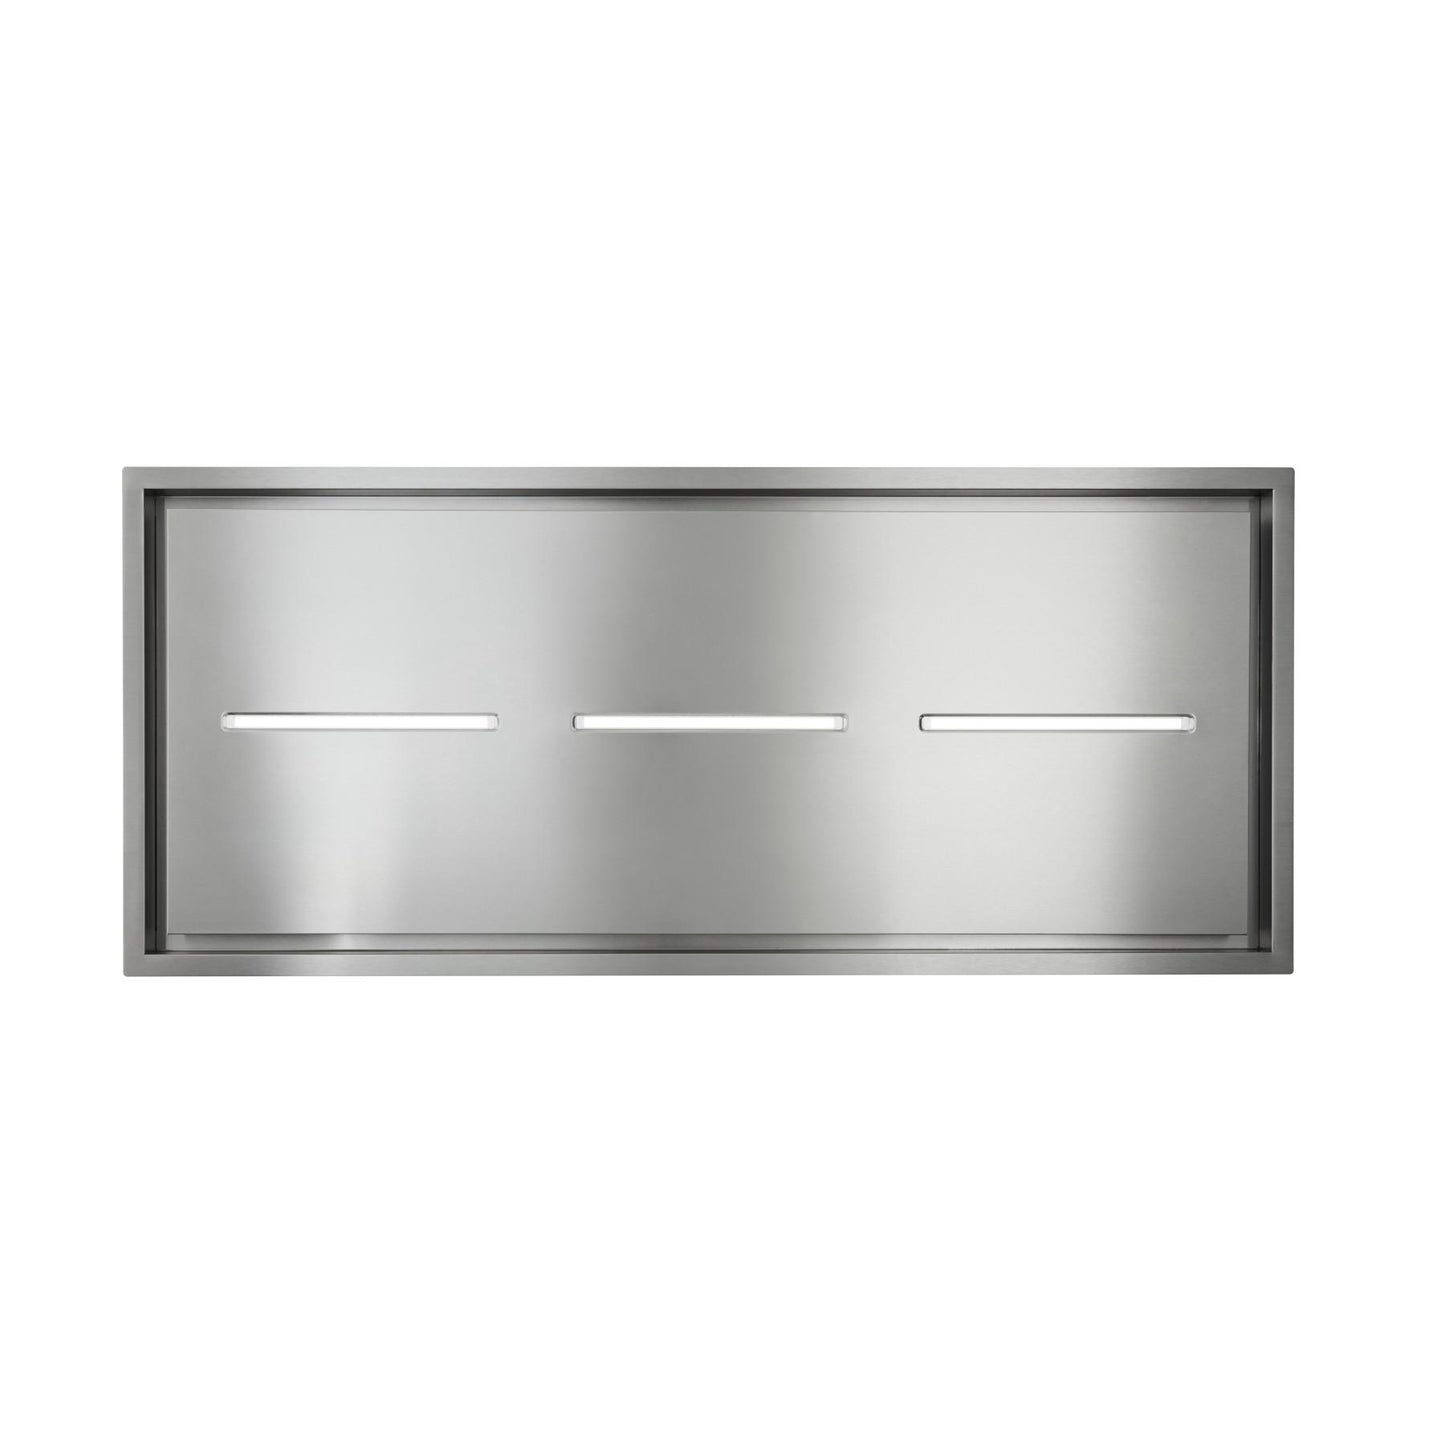 Best Range Hoods HBC163ESS 63-Inch Brushed Stainless Steel Ceiling Mounted Range Hood With Led Light, Choice Of Blowers Sold Separately (Hbc1 Series)